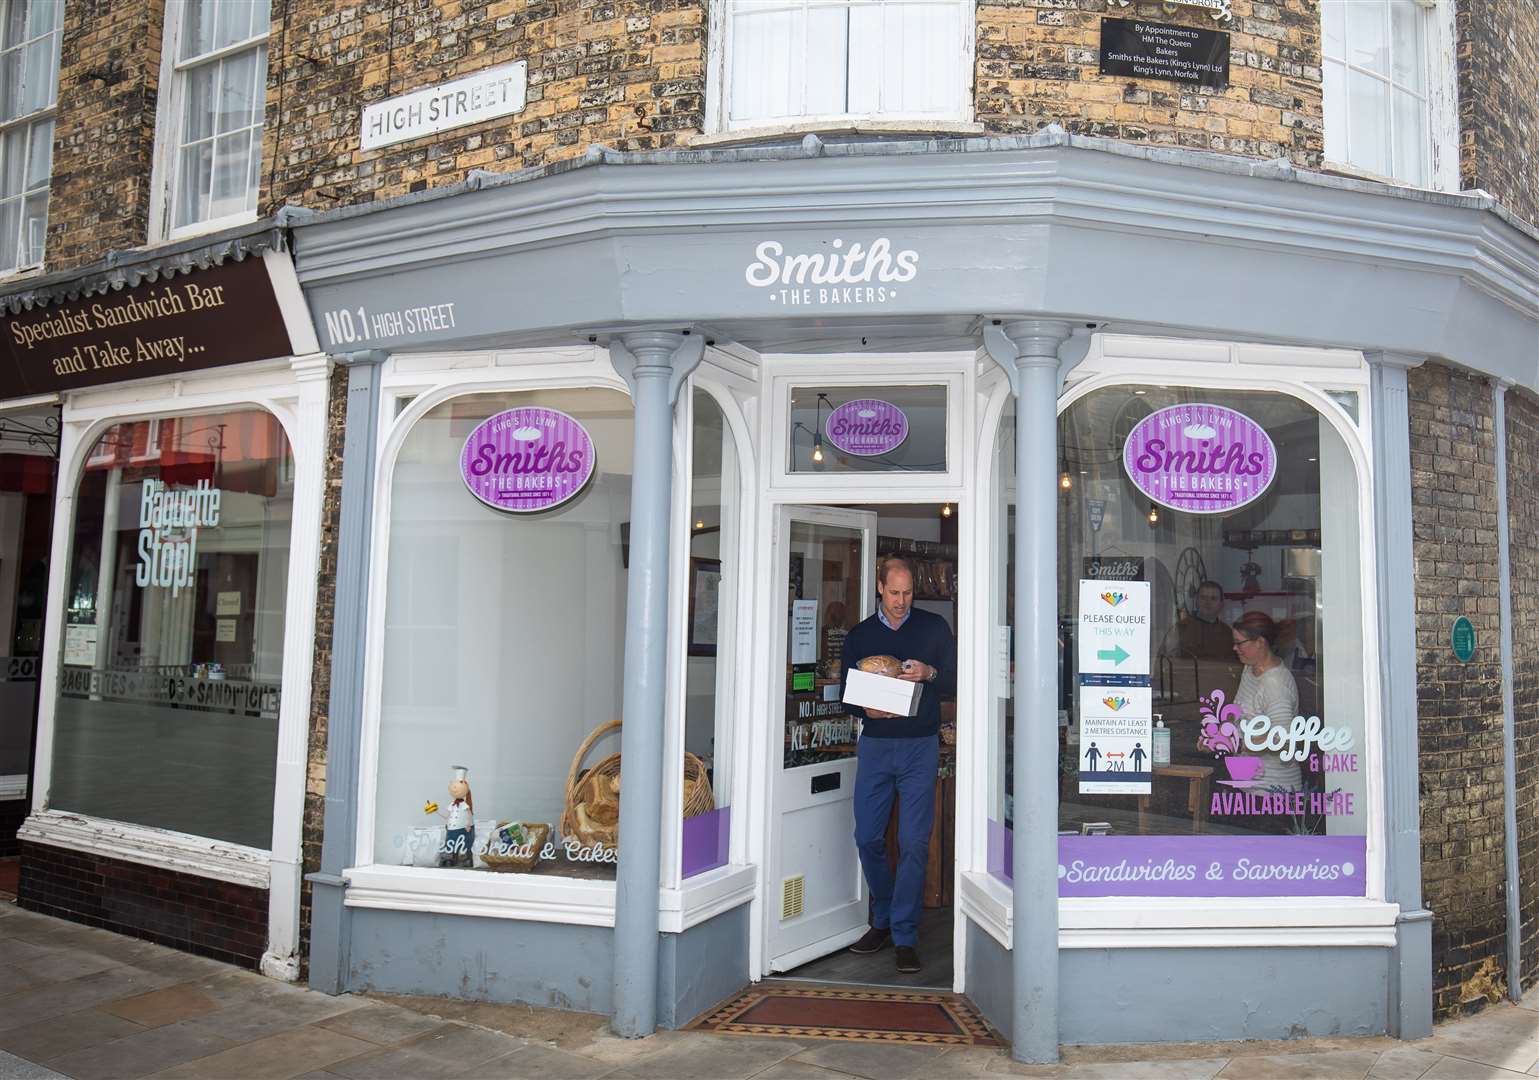 Fully stocked with baked goods and his cake, William leaves Smiths (Aaron Chown/PA)